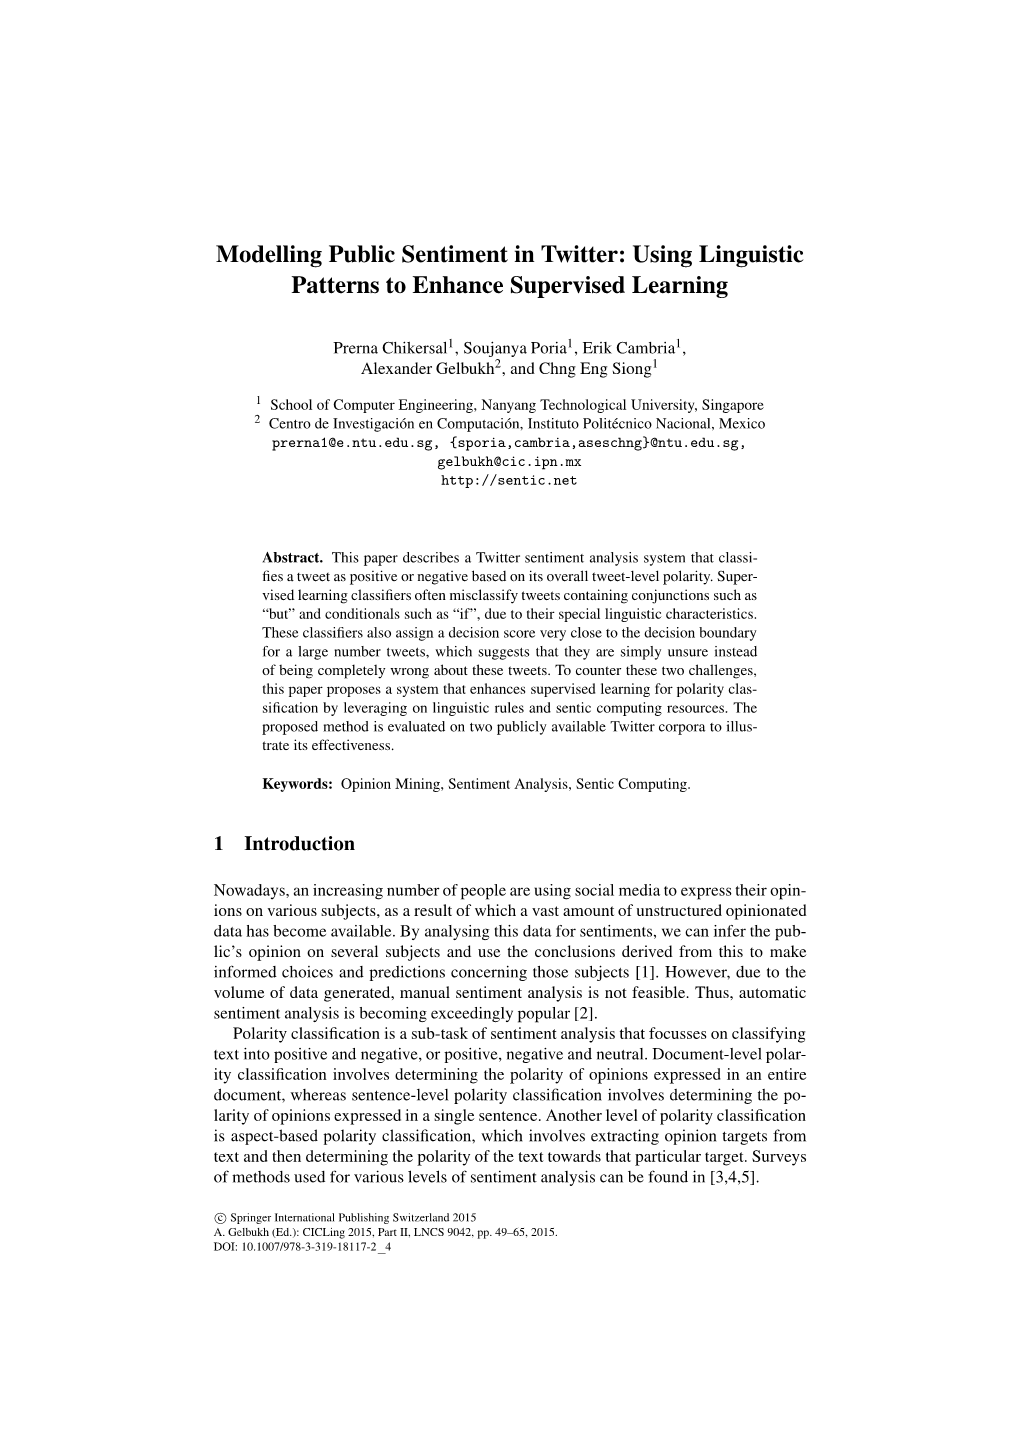 Modelling Public Sentiment in Twitter: Using Linguistic Patterns to Enhance Supervised Learning